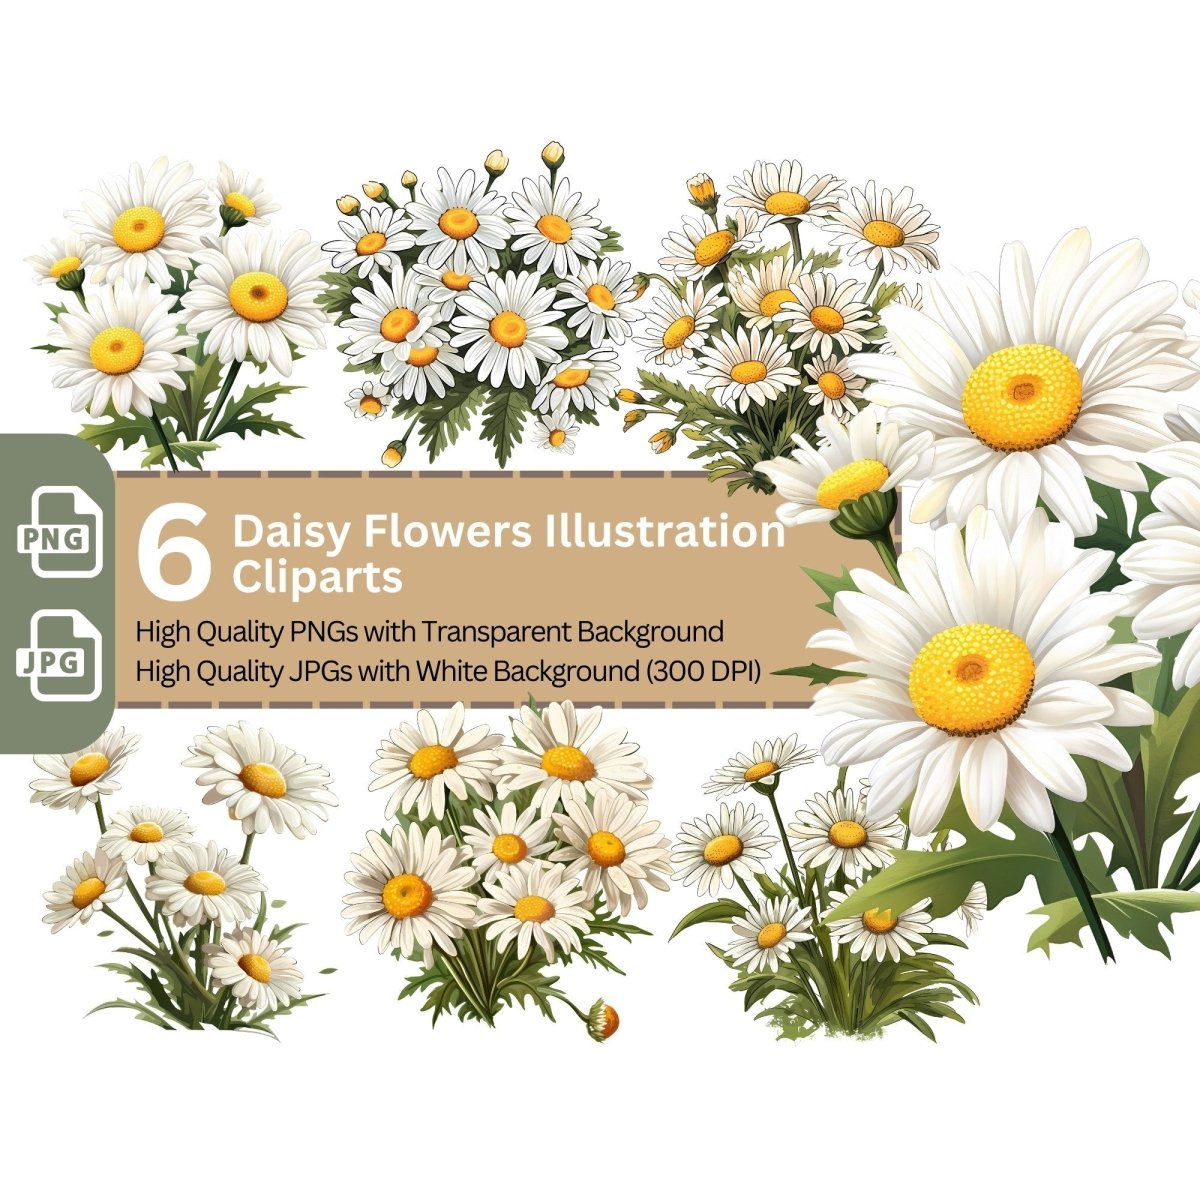 Daisy Flowers 6+6 PNG Clip Art Bundle - Everything Pixel